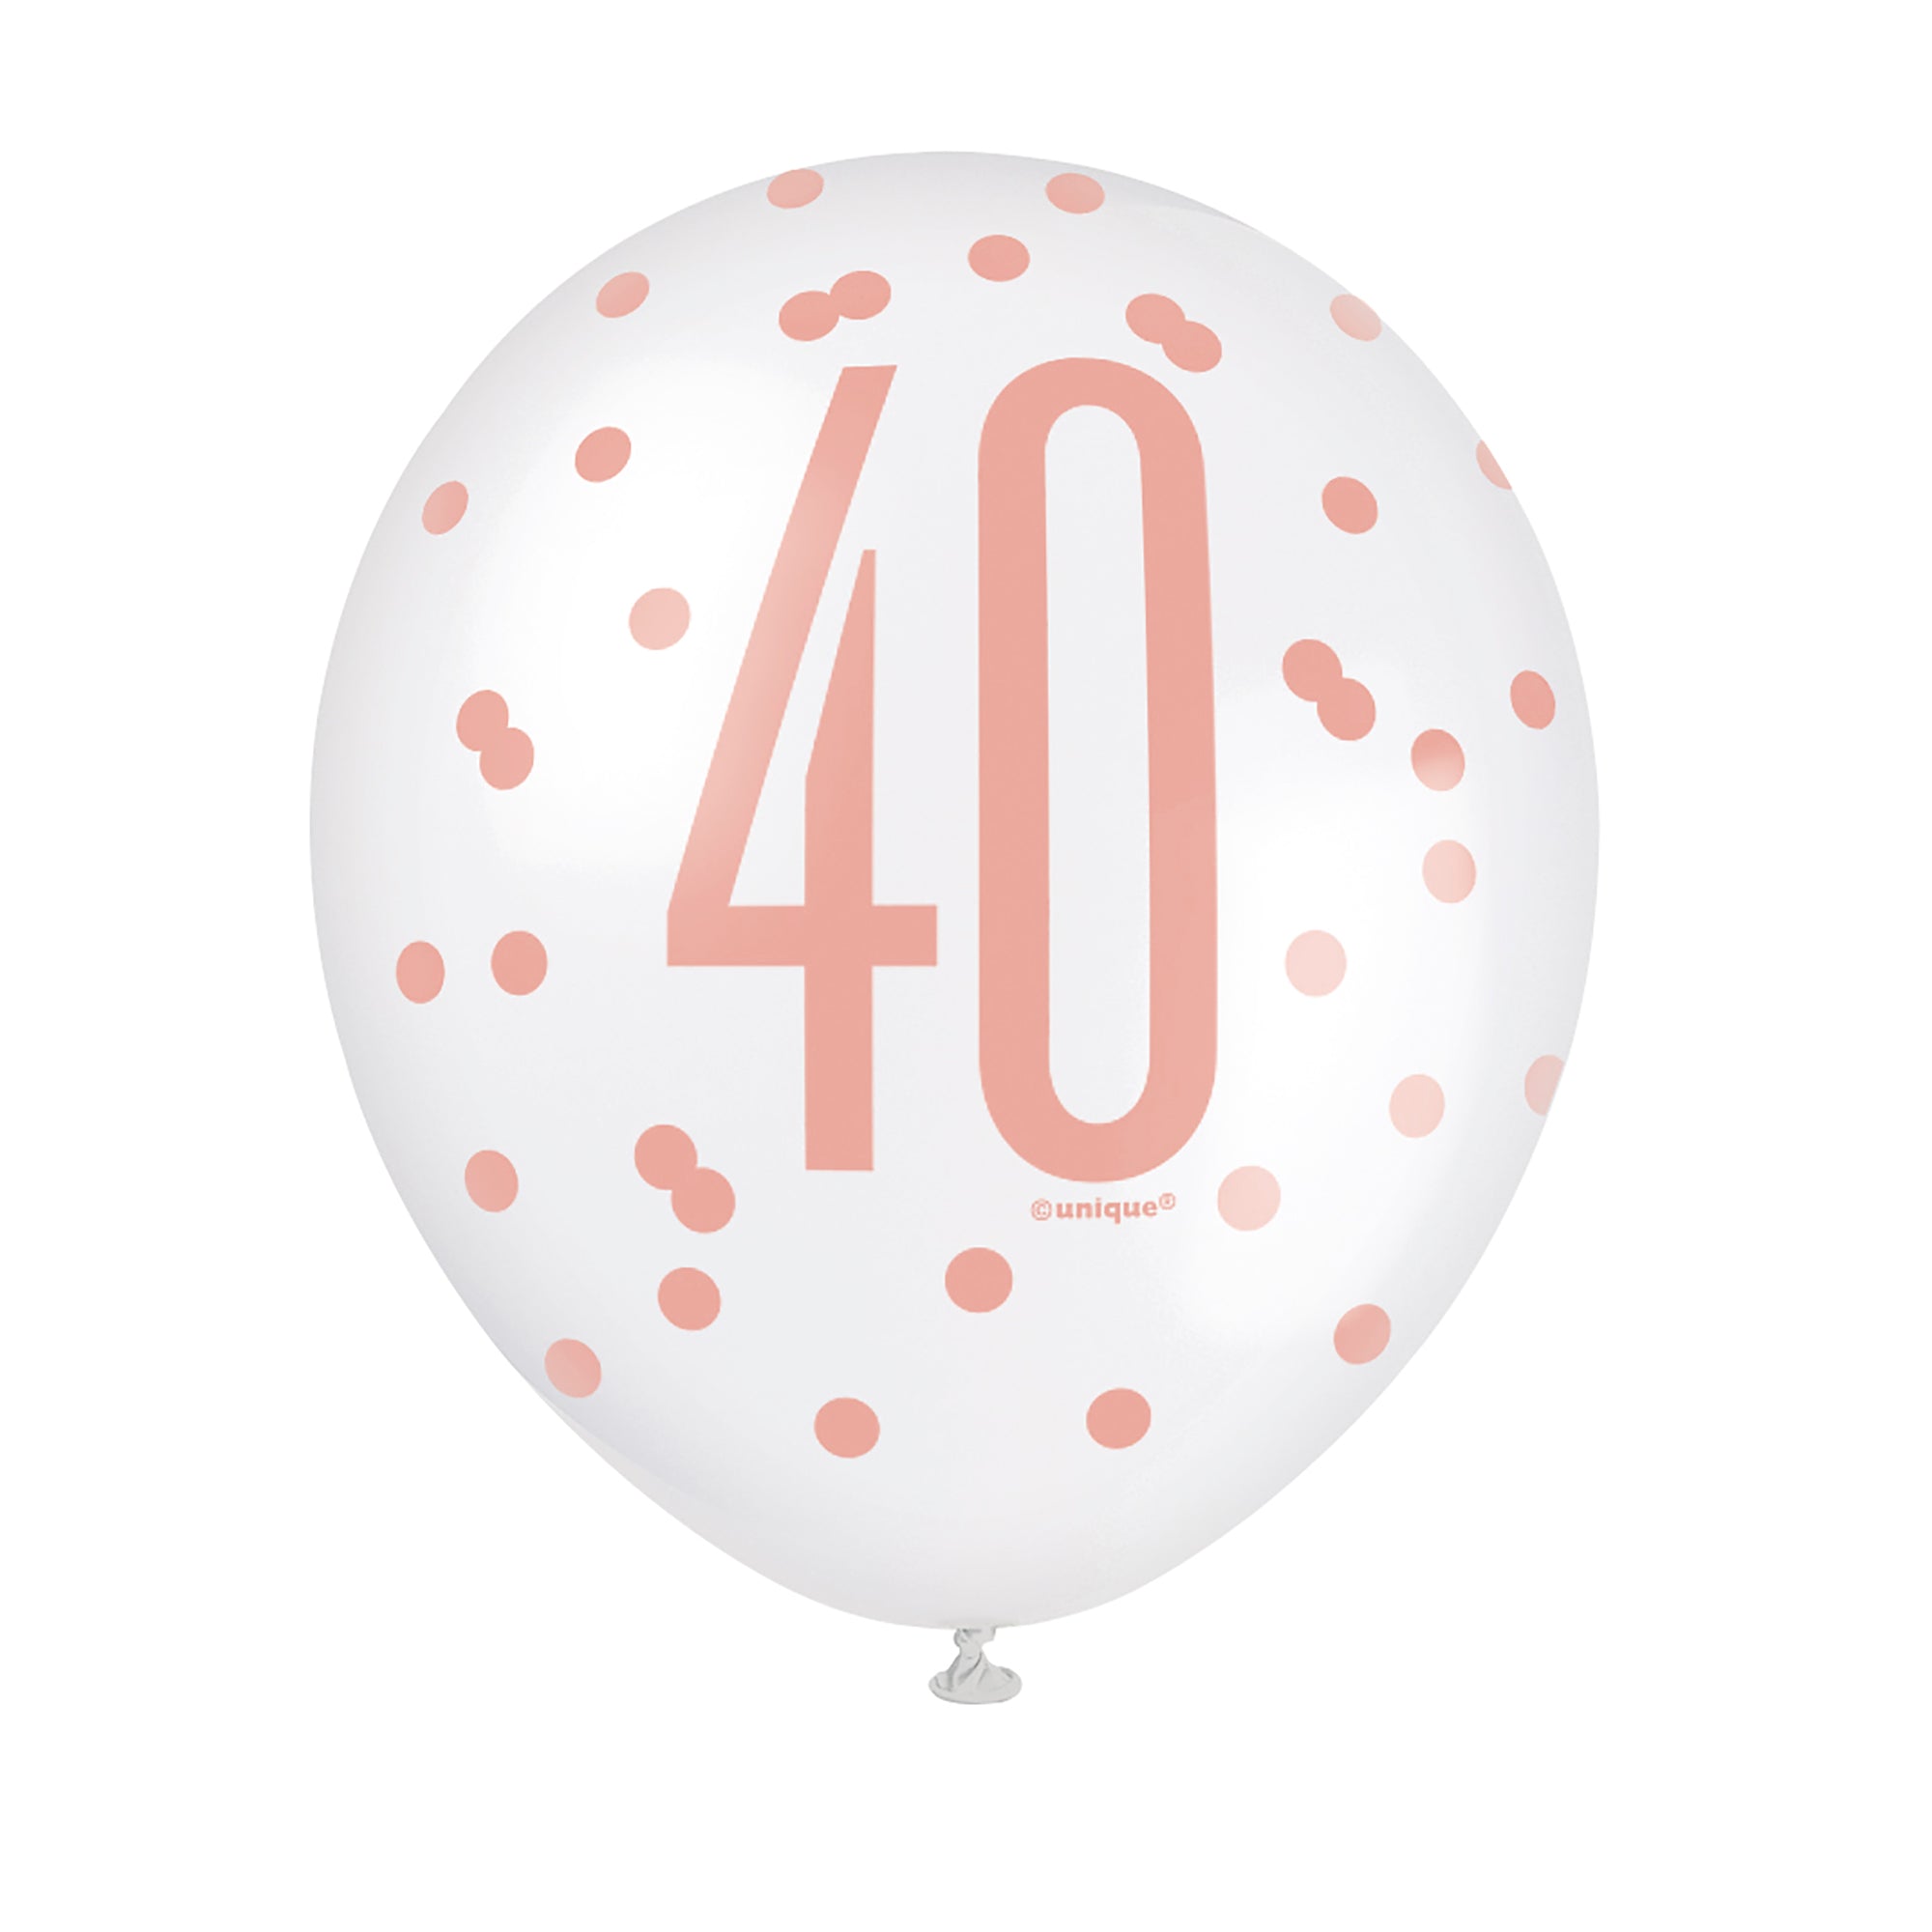 Age 40 6 Printed Latex Balloons 12in Pink and White